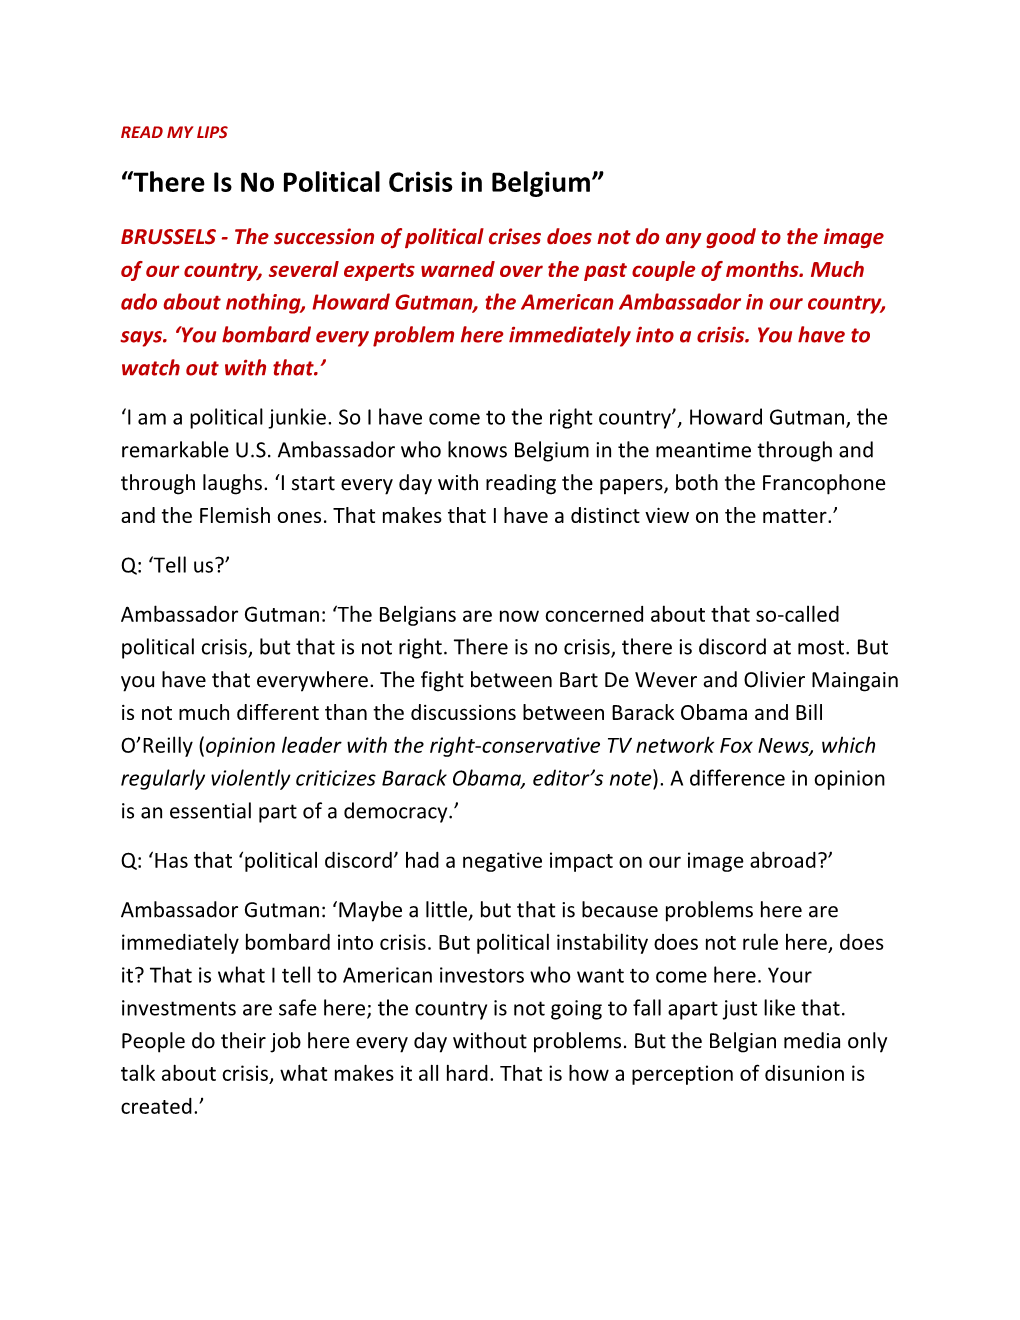 “There Is No Political Crisis in Belgium”